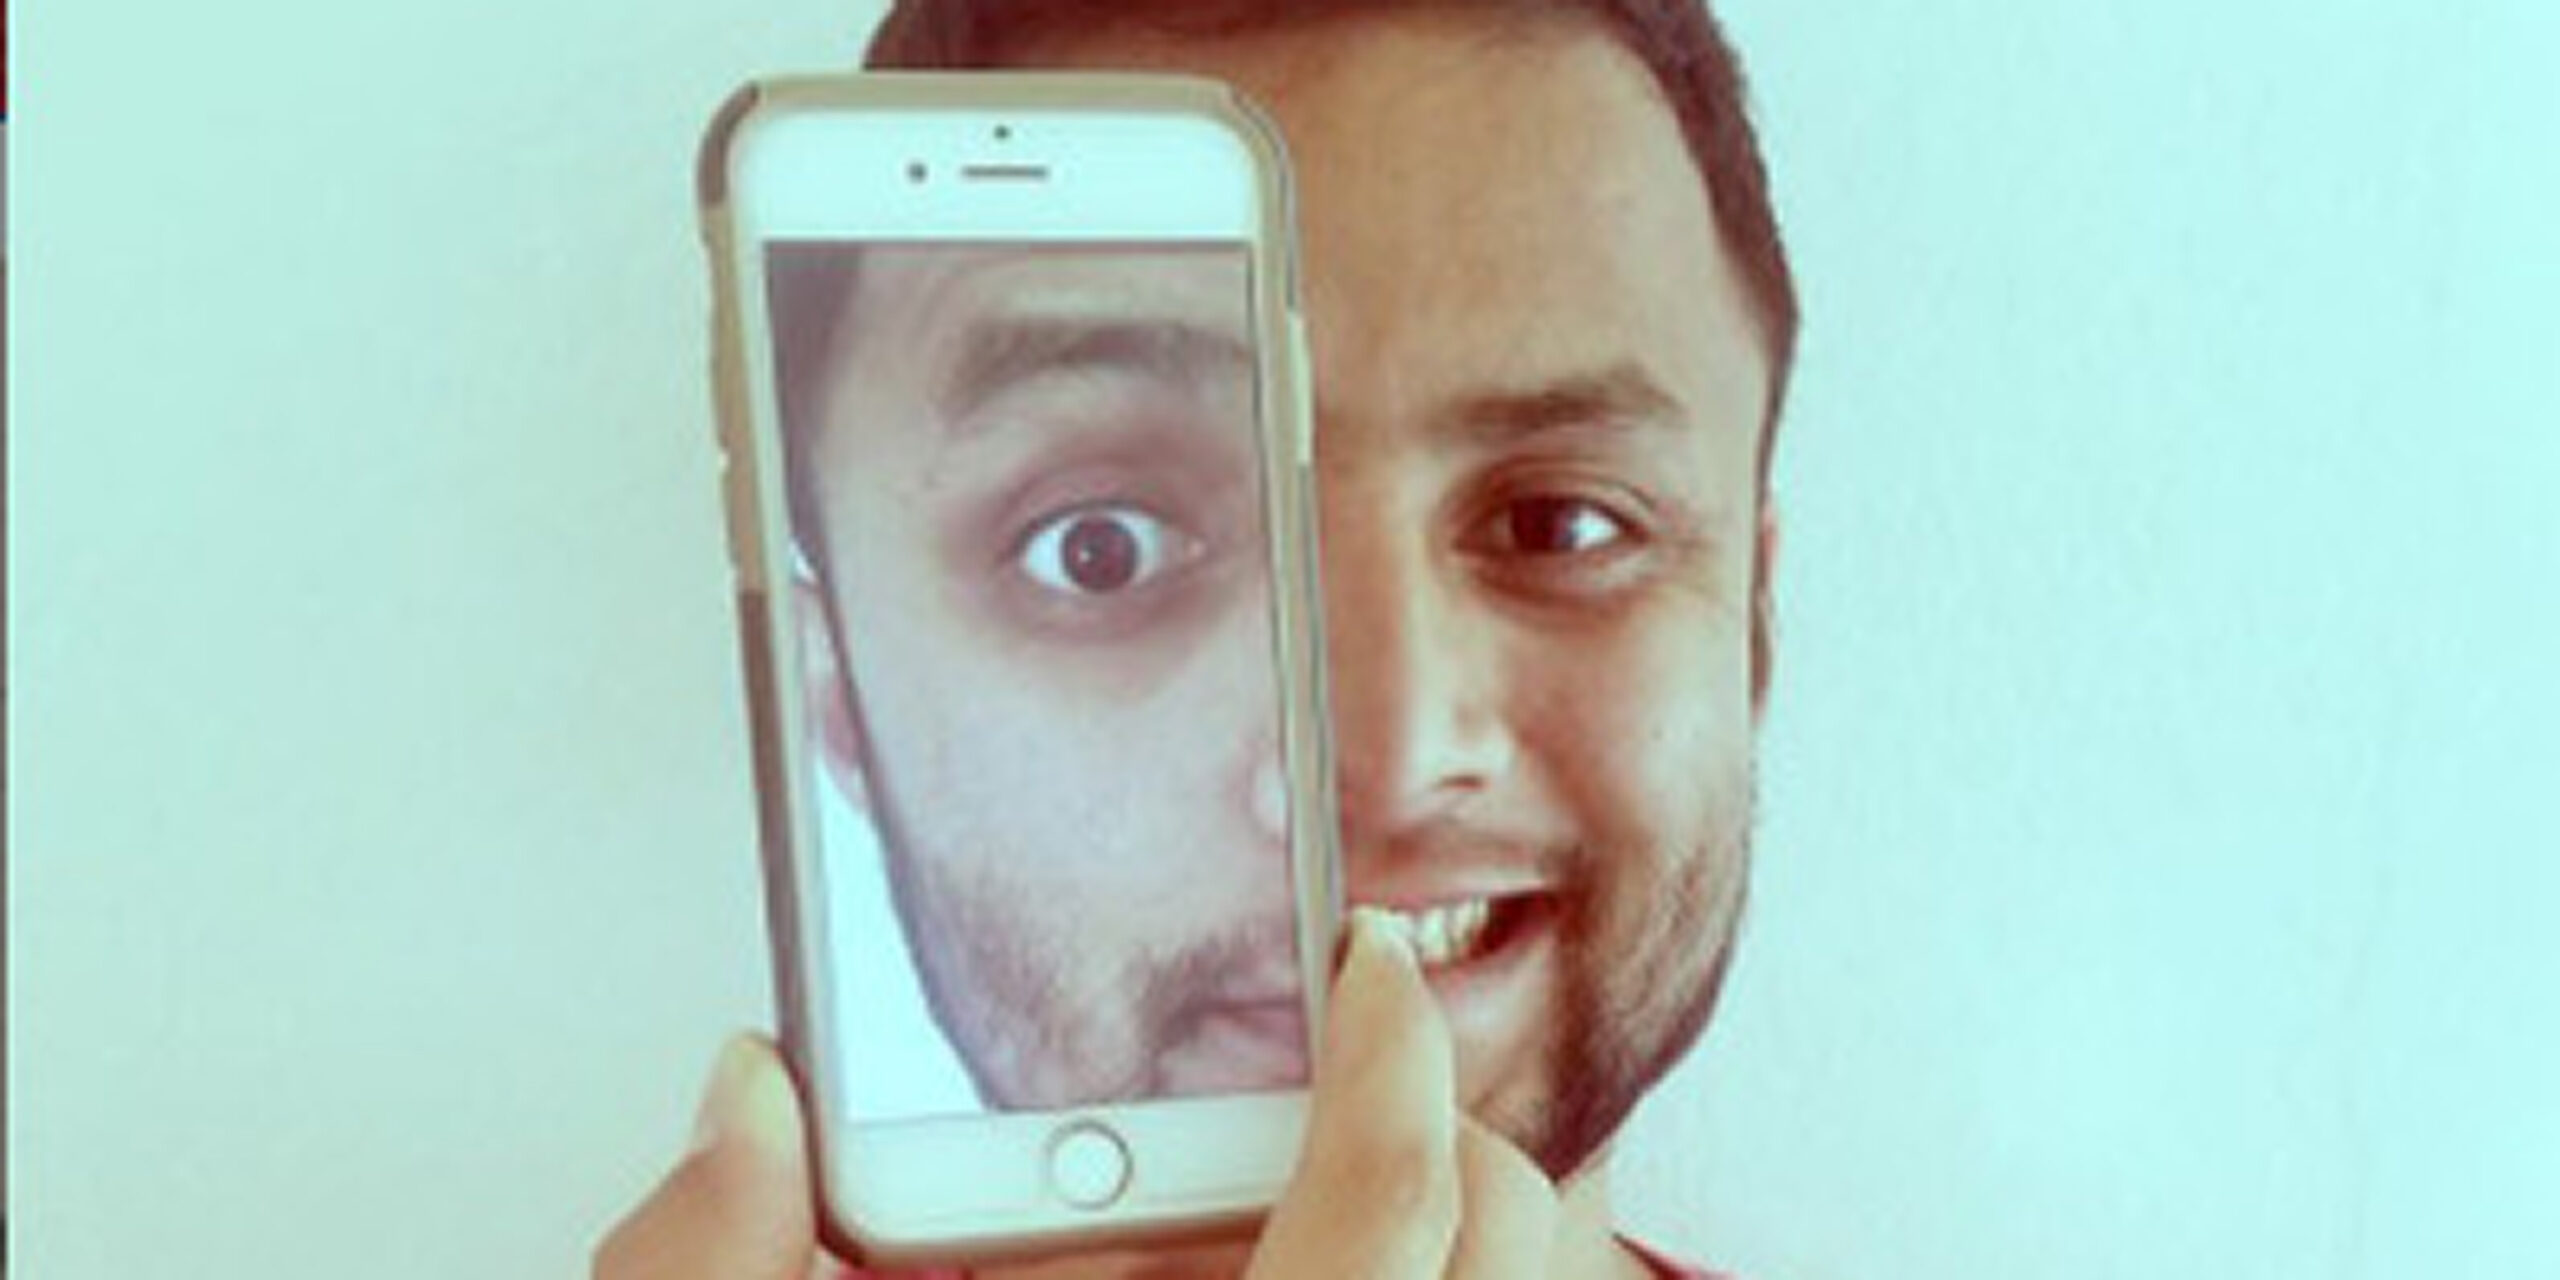 Rajendra "Raj" Thakurathi ('12) takes a picture with himself on his phone screen